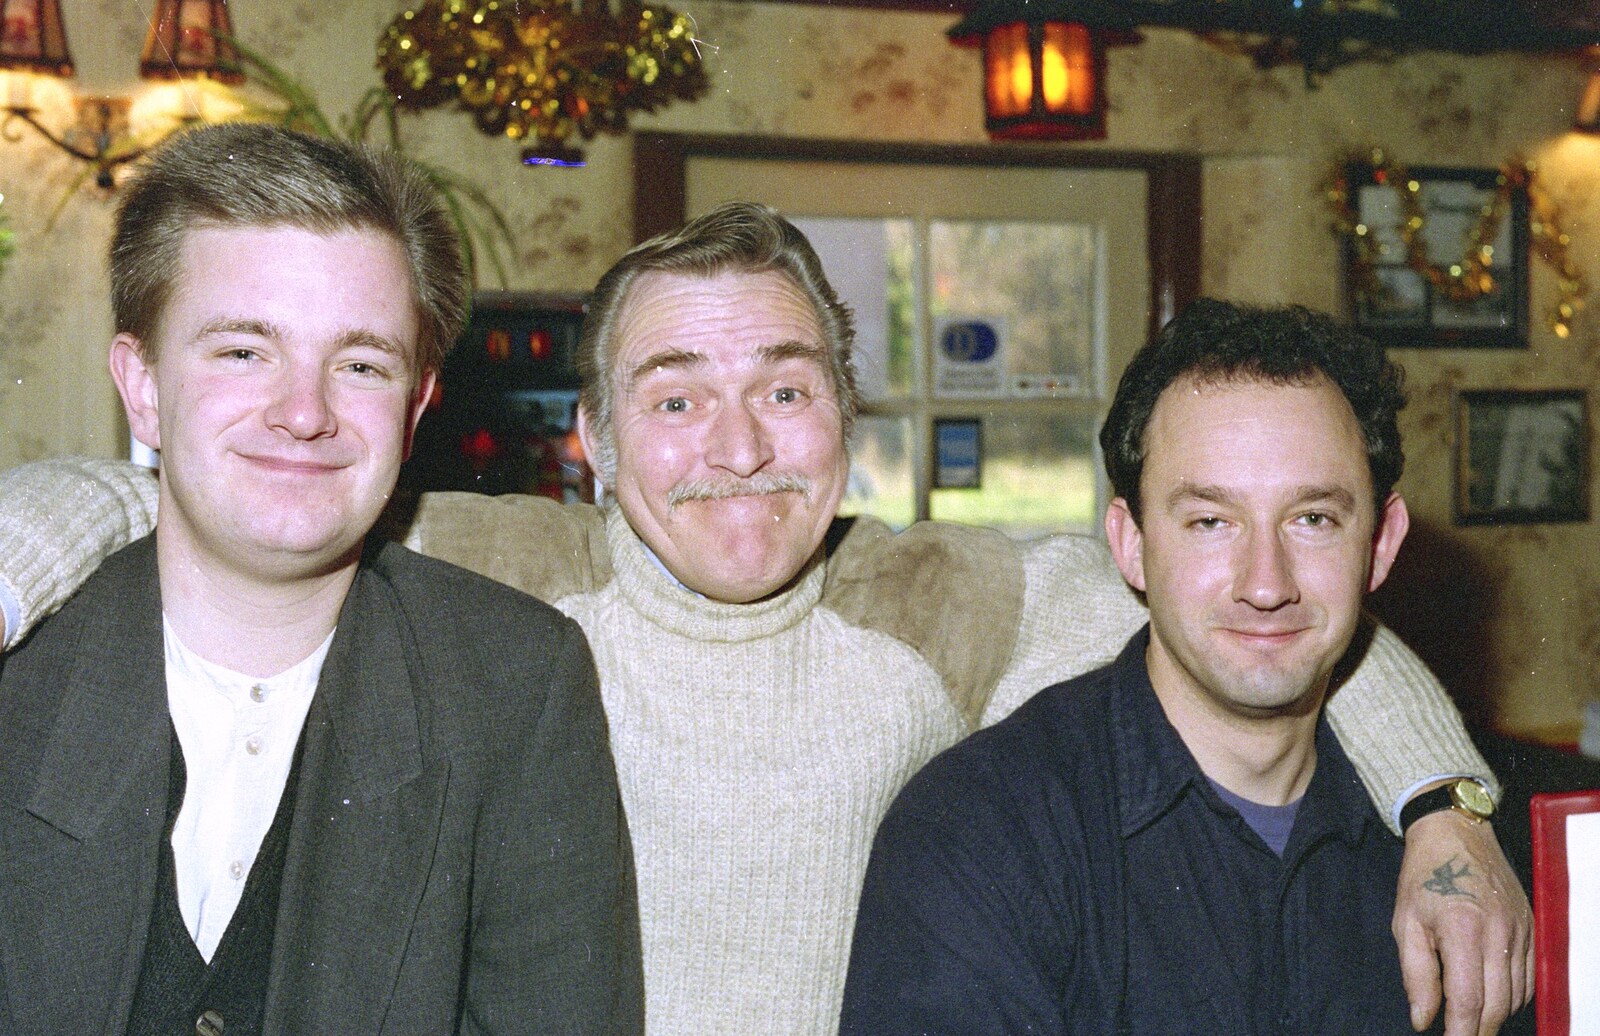 Nosher, Tony 'T-Shirt' and DH from New Year's Eve in the Swan Inn, Brome, Suffolk - 31st December 1995